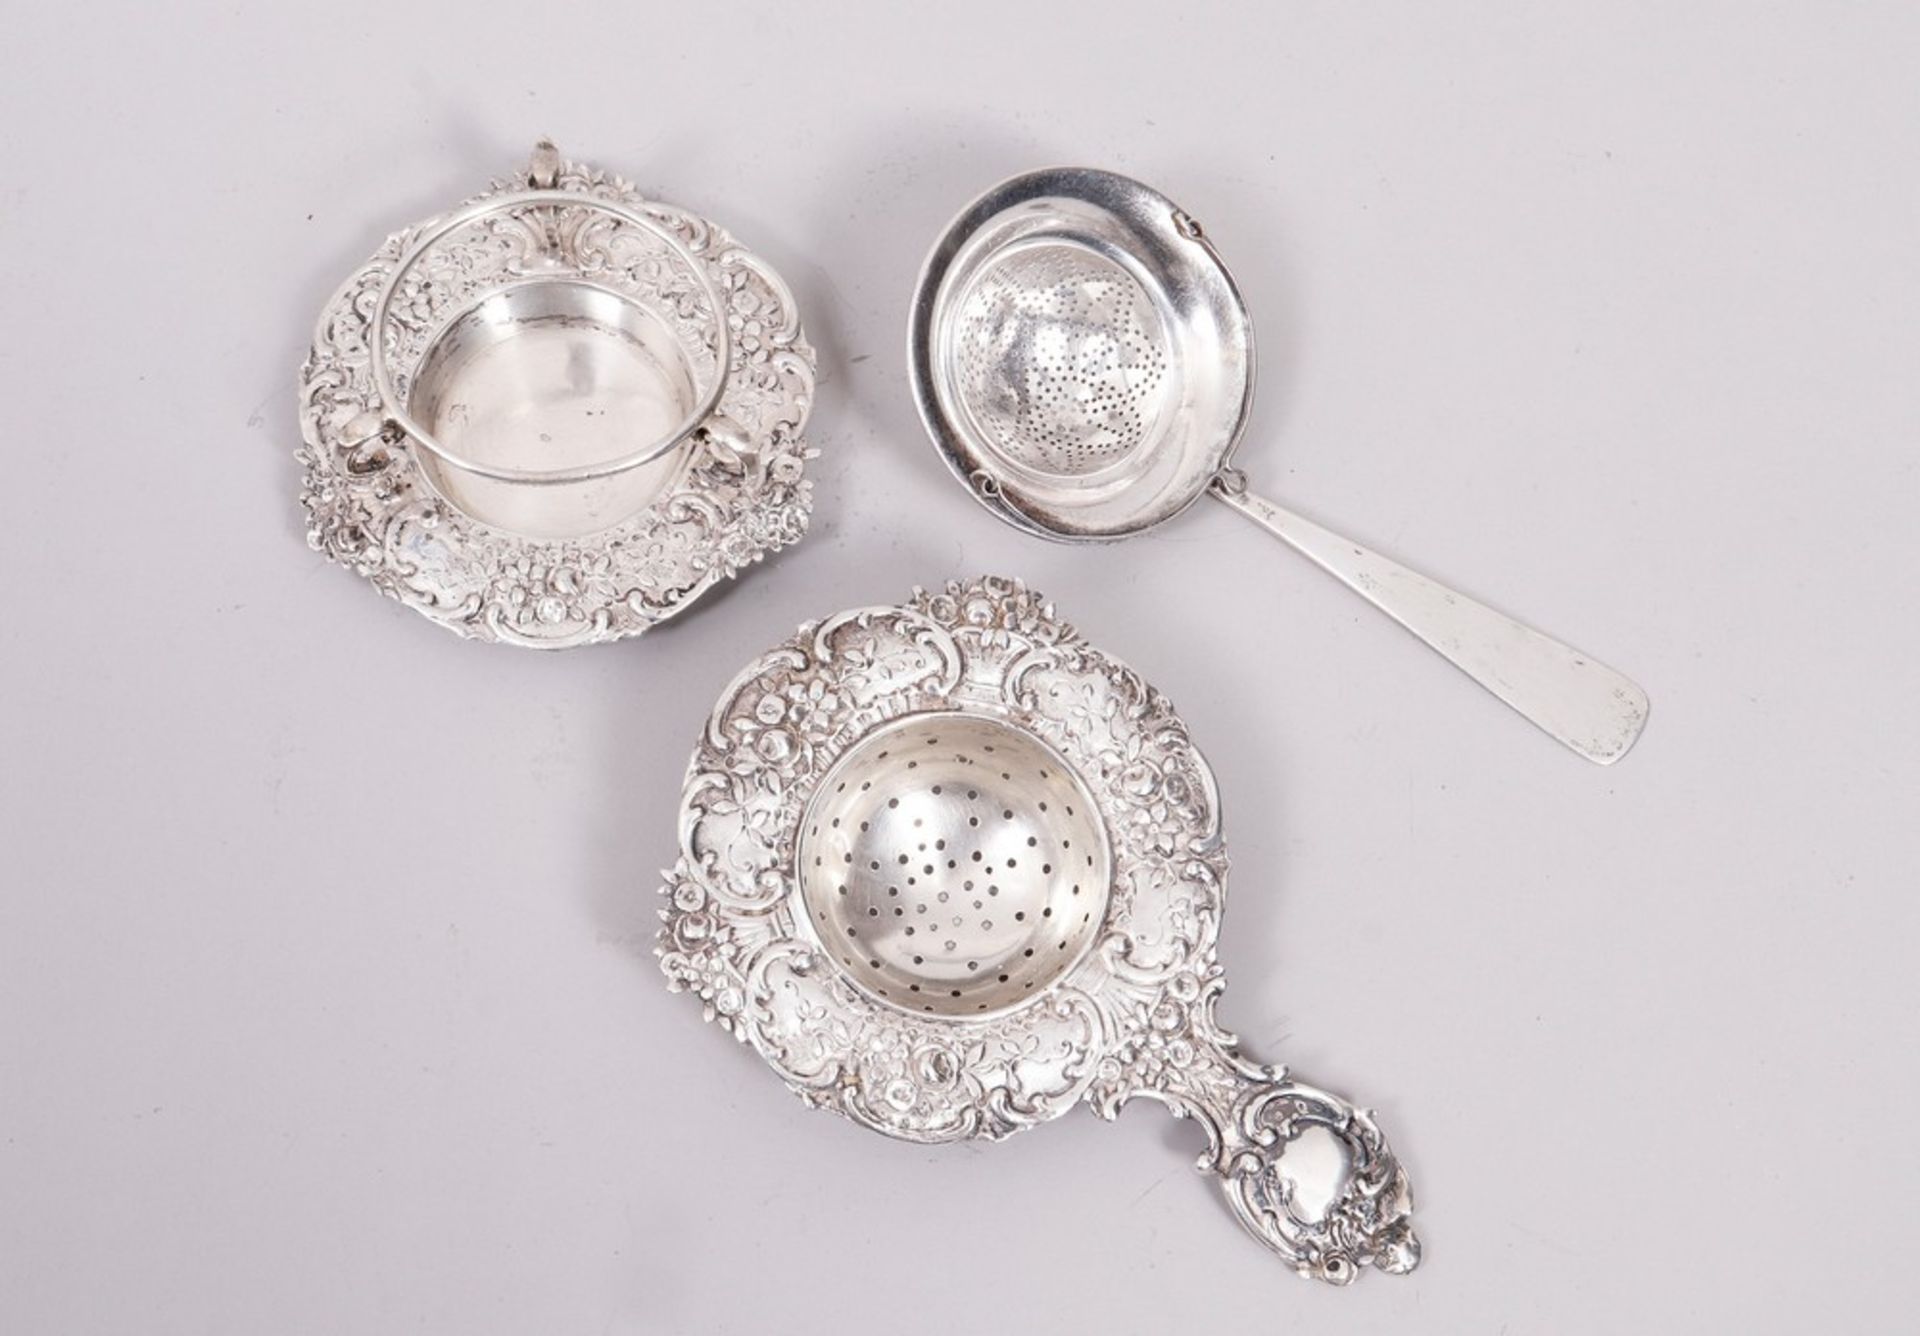 2 tea strainers, 800 silver, German and others, c. 1900, 3 pcs.